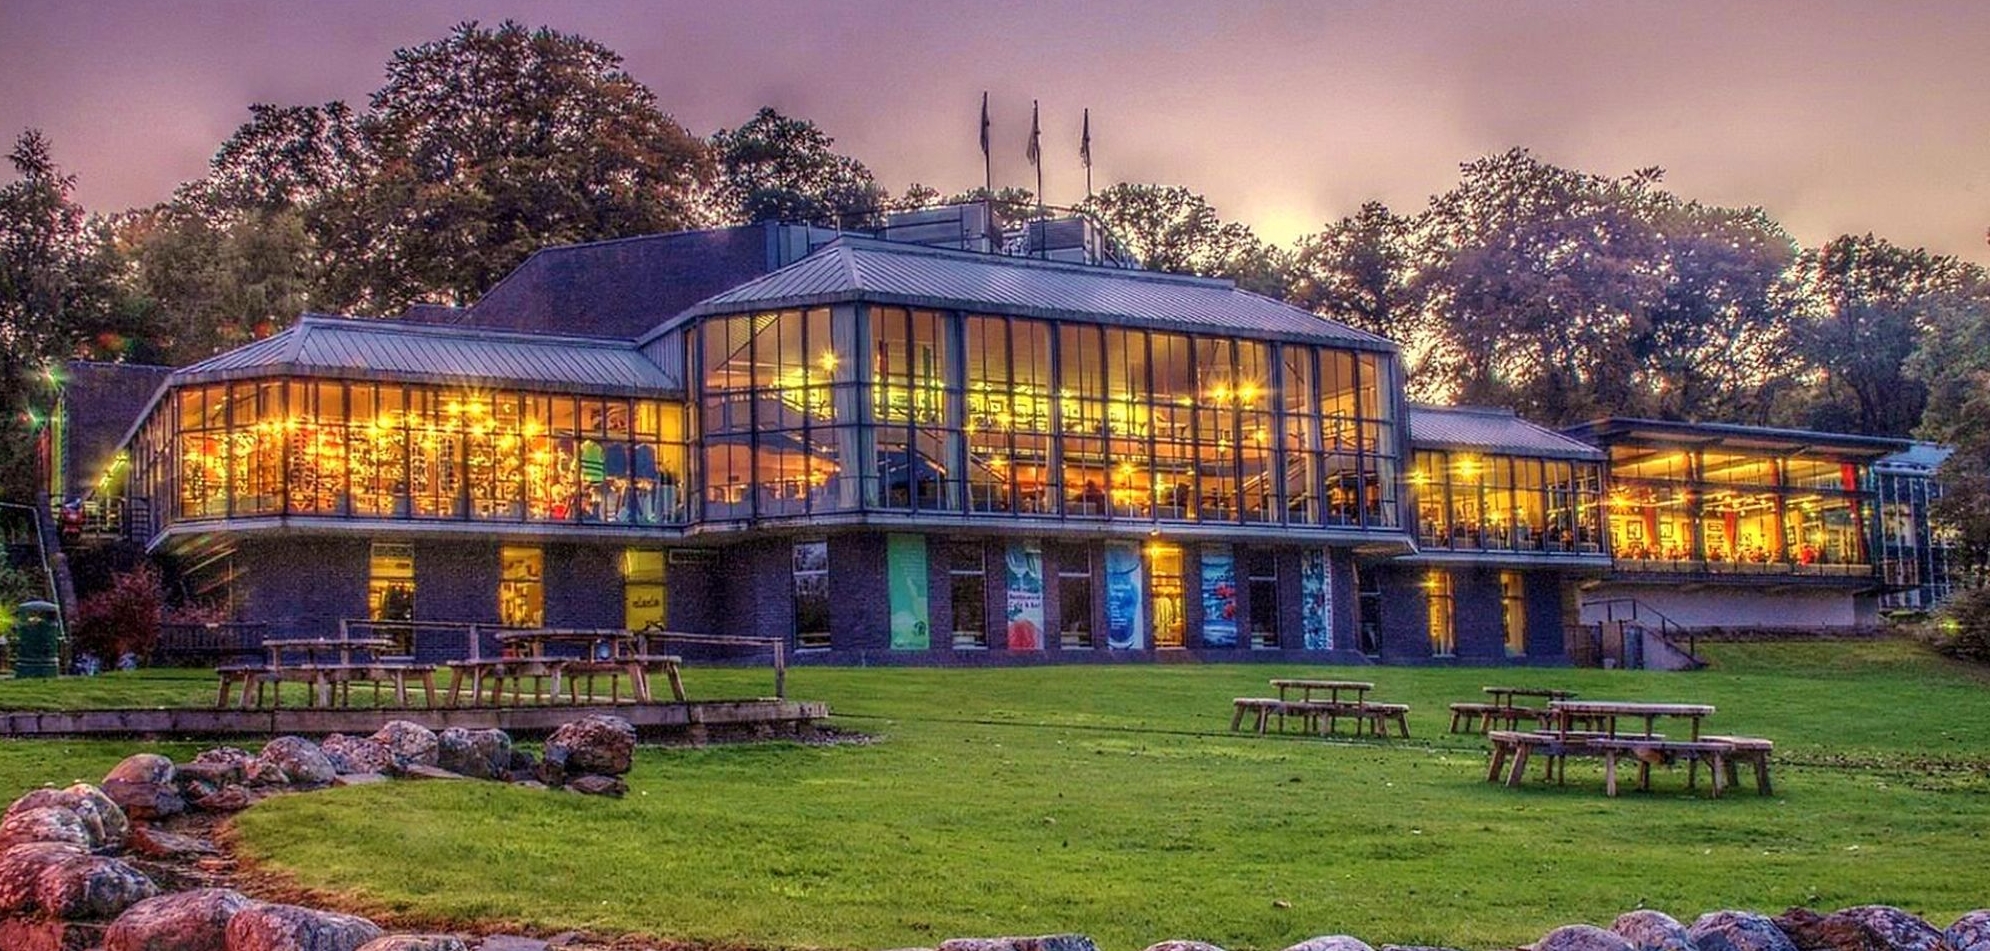 An image of the front of the main building of Pitlochry Festival Theatre with a full glass front and lights shining through each one, the ground outside is all covered in grass with wooden benches populating different parts and an evening sky above